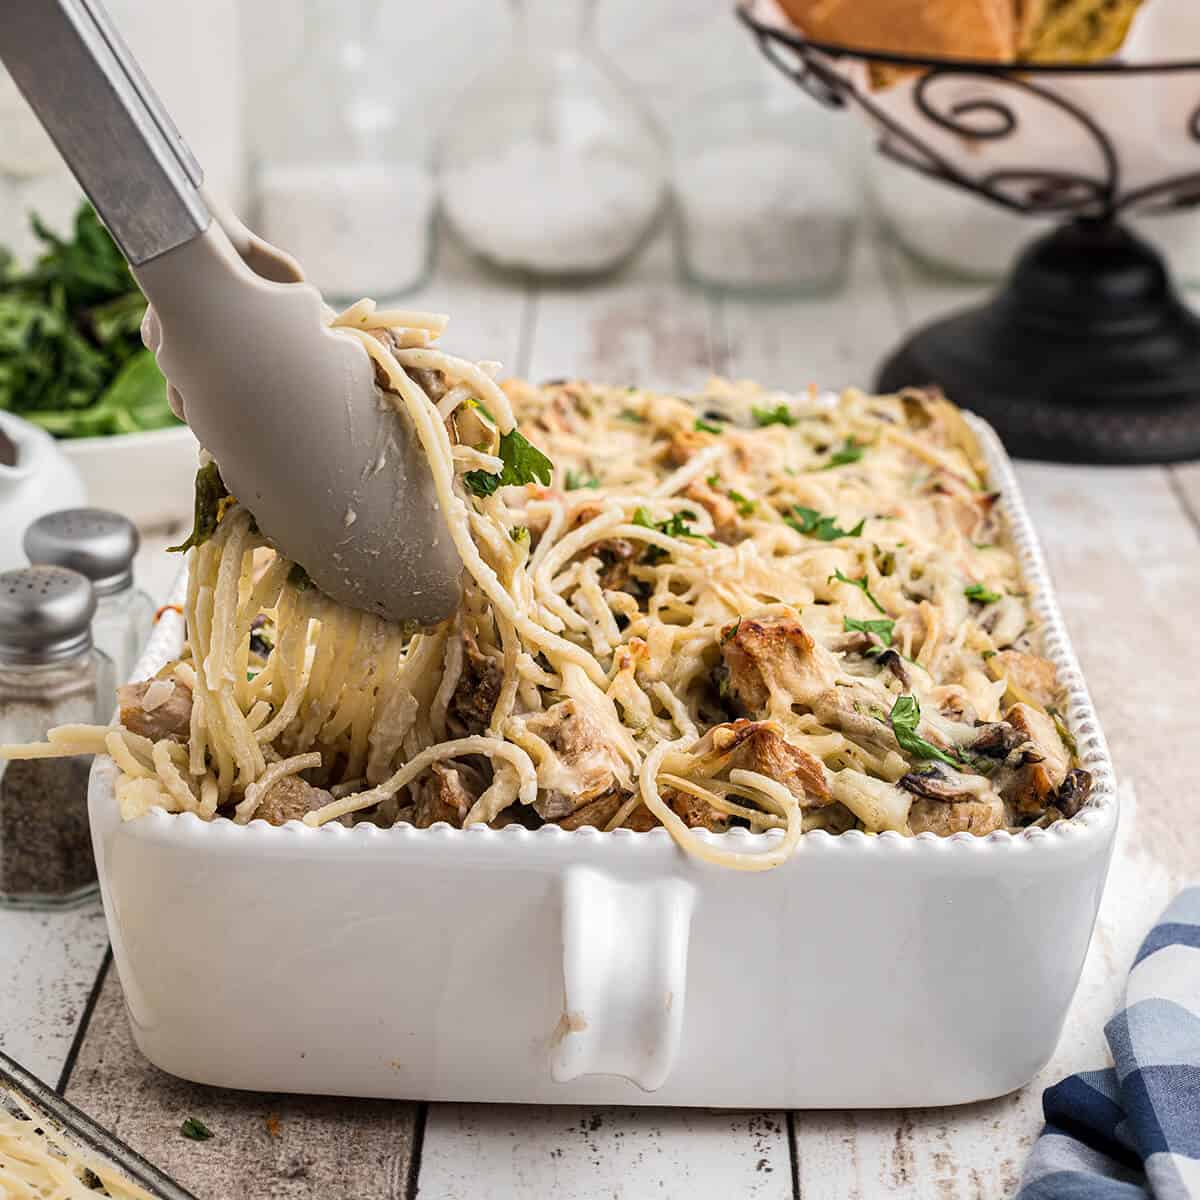 Turkey tetrazzini in a casserole dish with serving tongs.